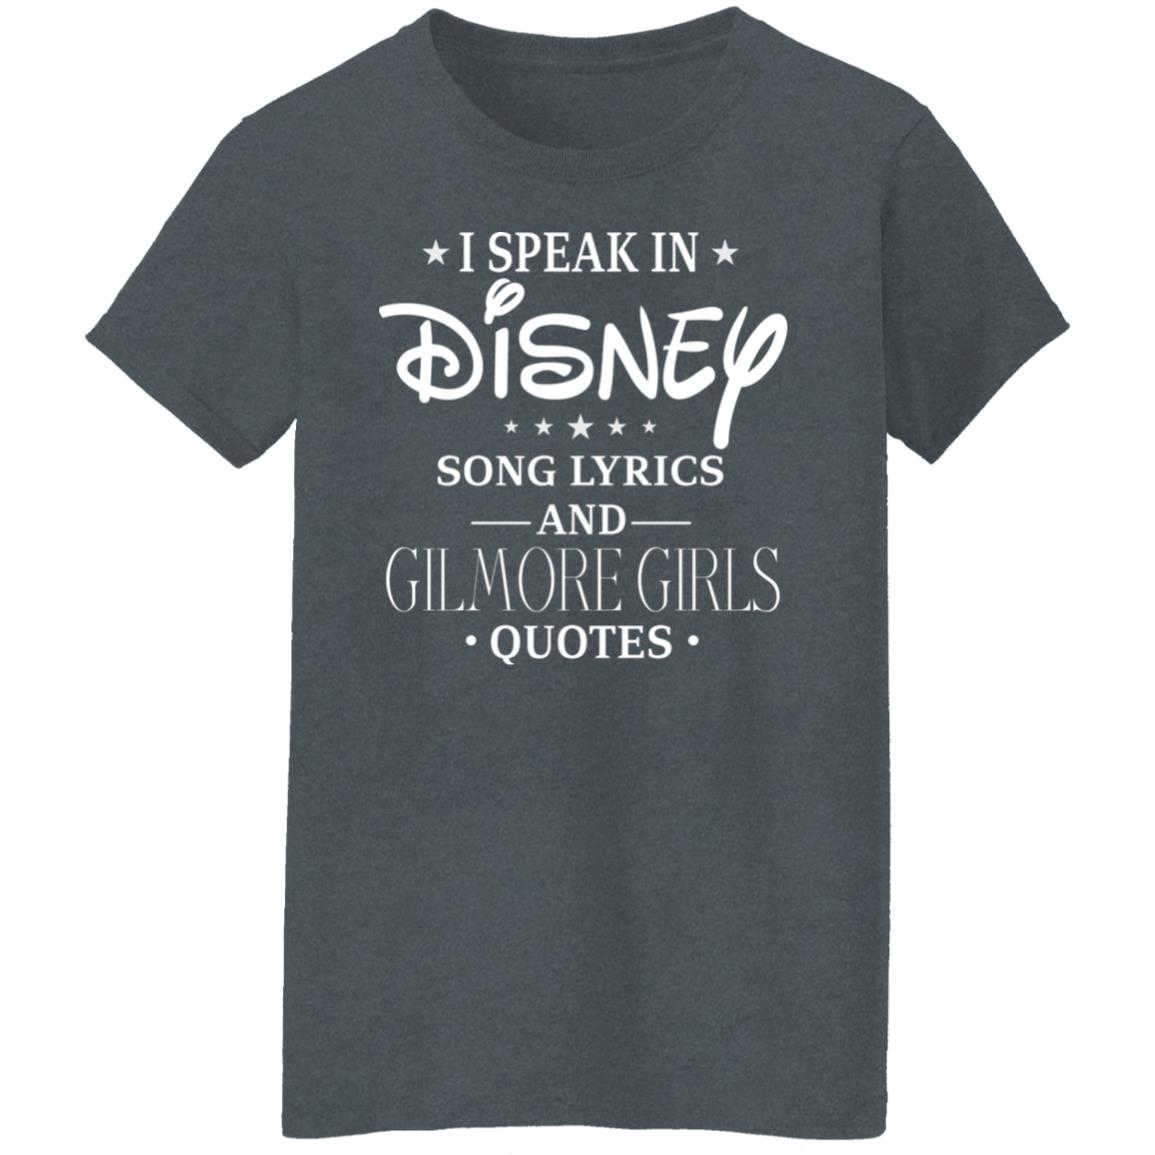 I Speak In Disney Song Lyrics And Gilmore Girls Quotes T Shirts Hoodies Long Sleeve